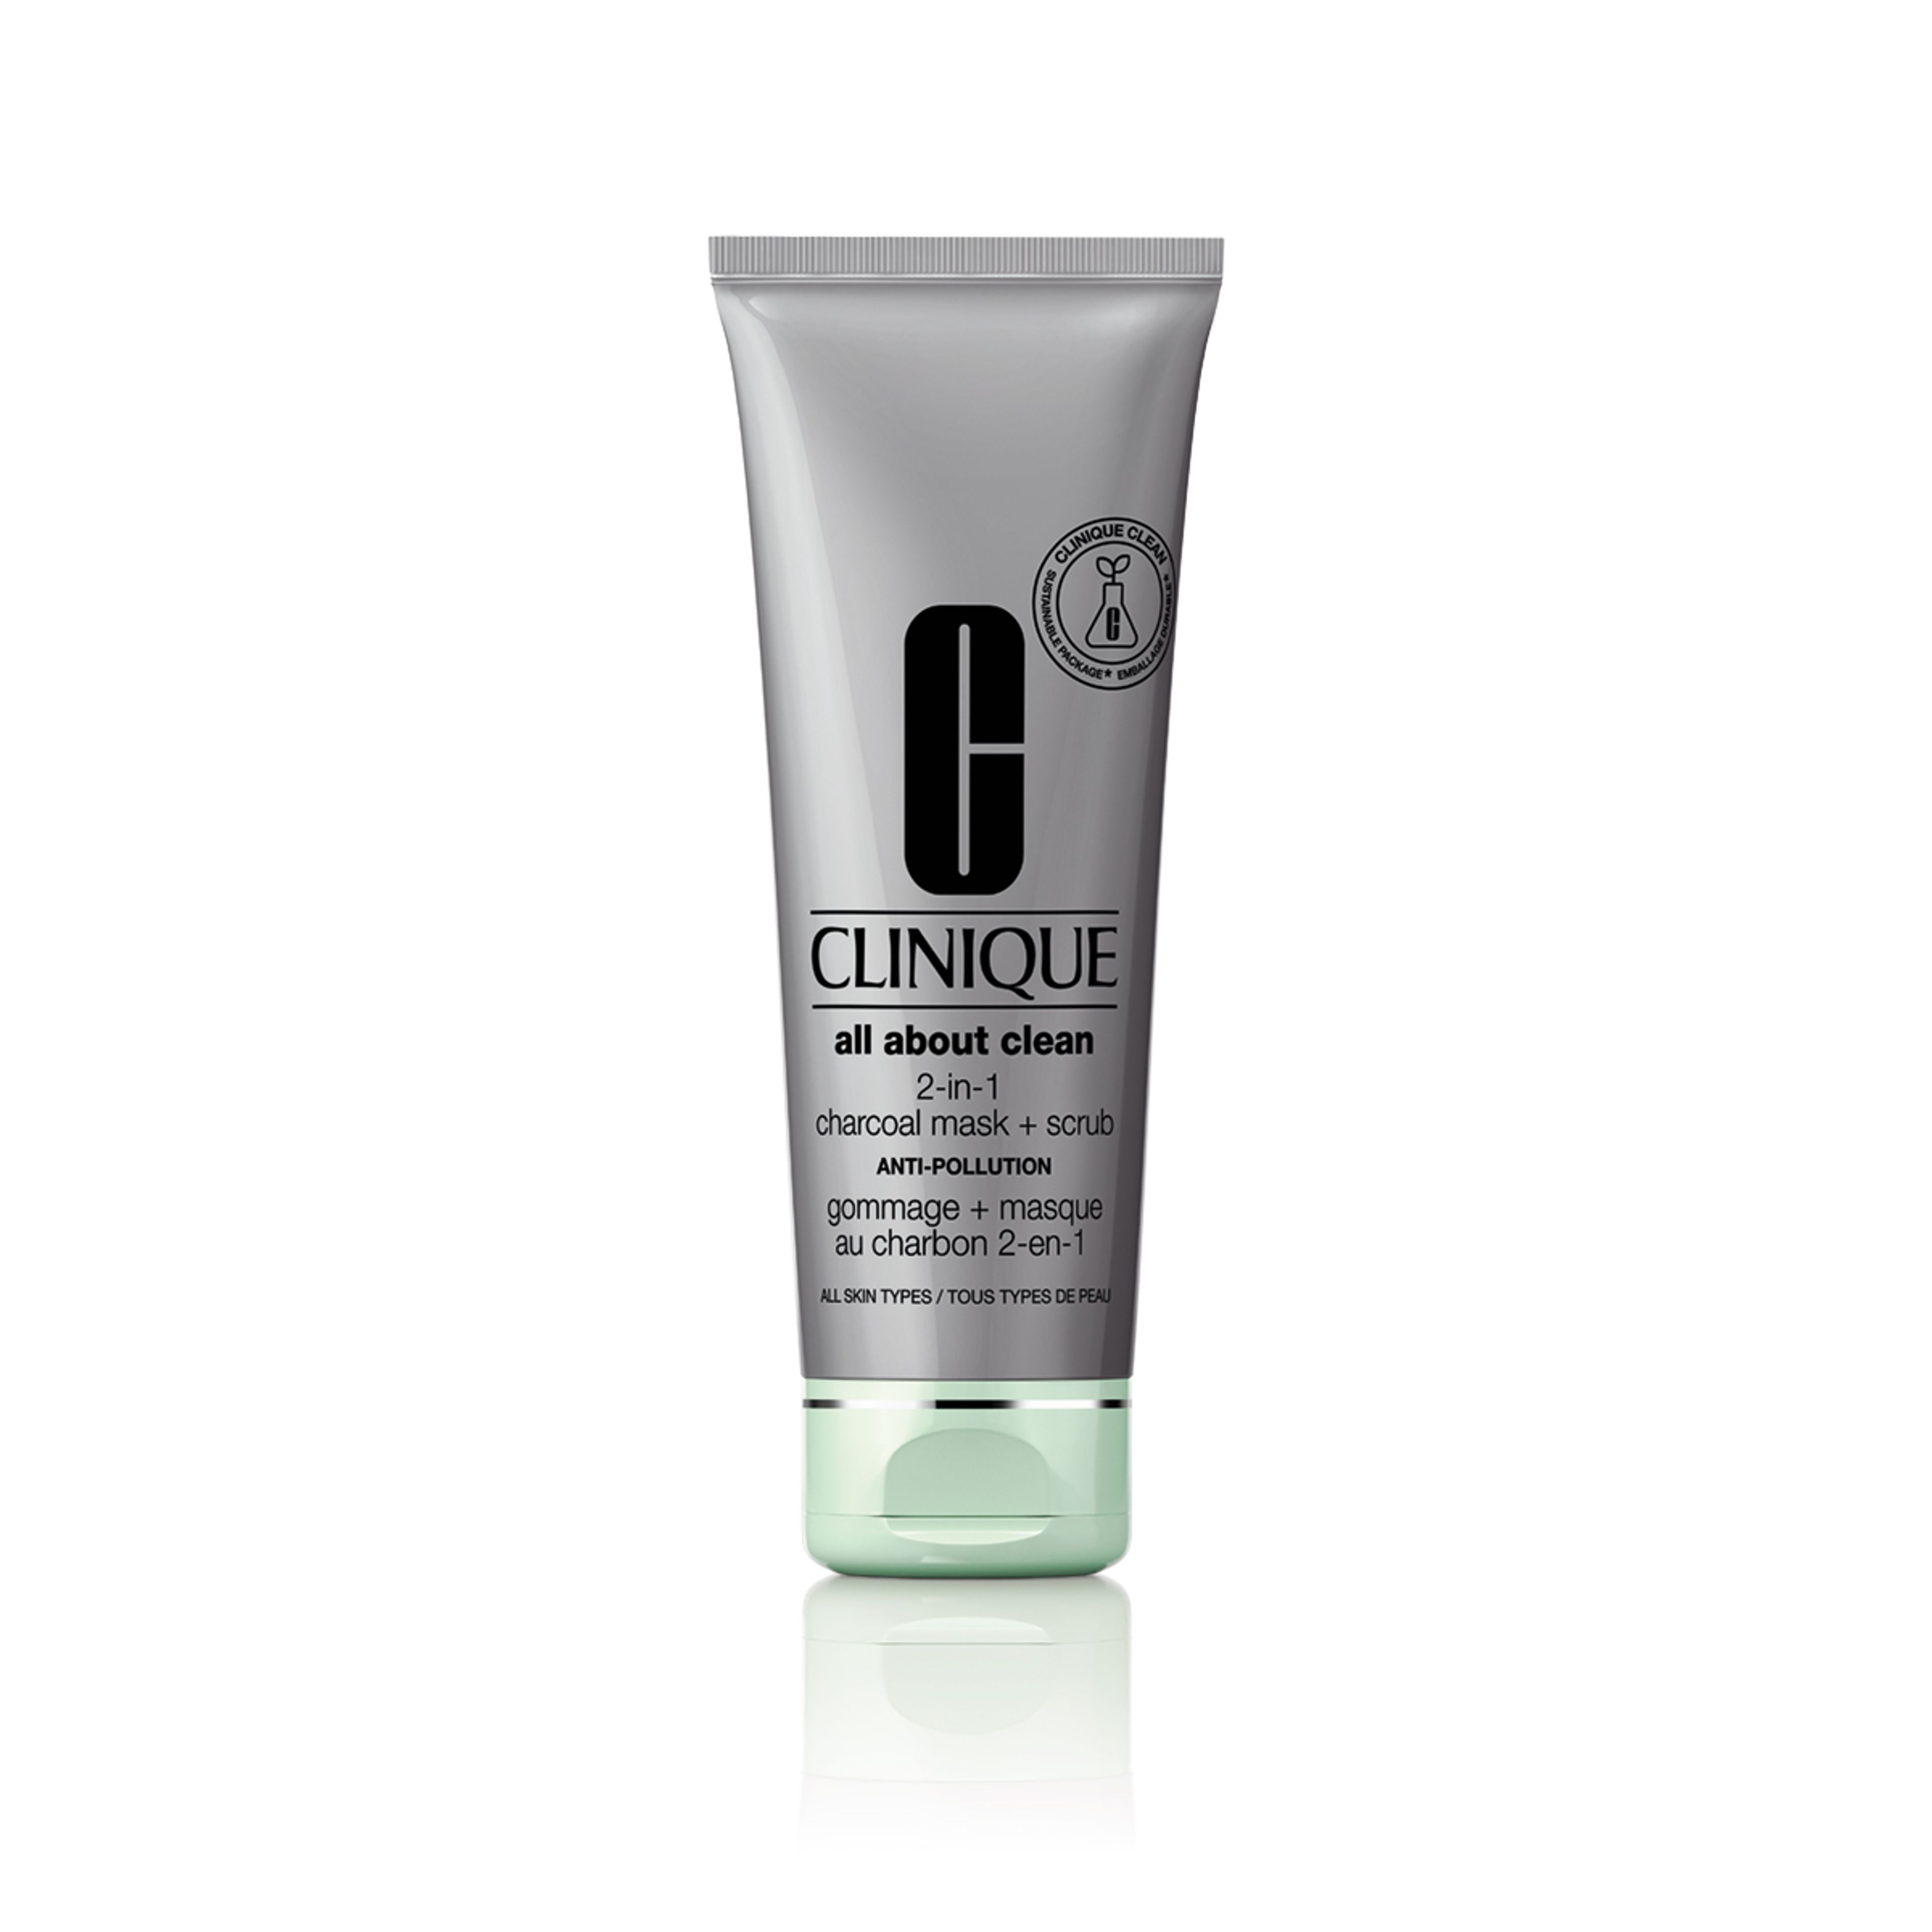 Clinique All About Clean™ 2-in-1 Charcoal Mask + Scrub 1